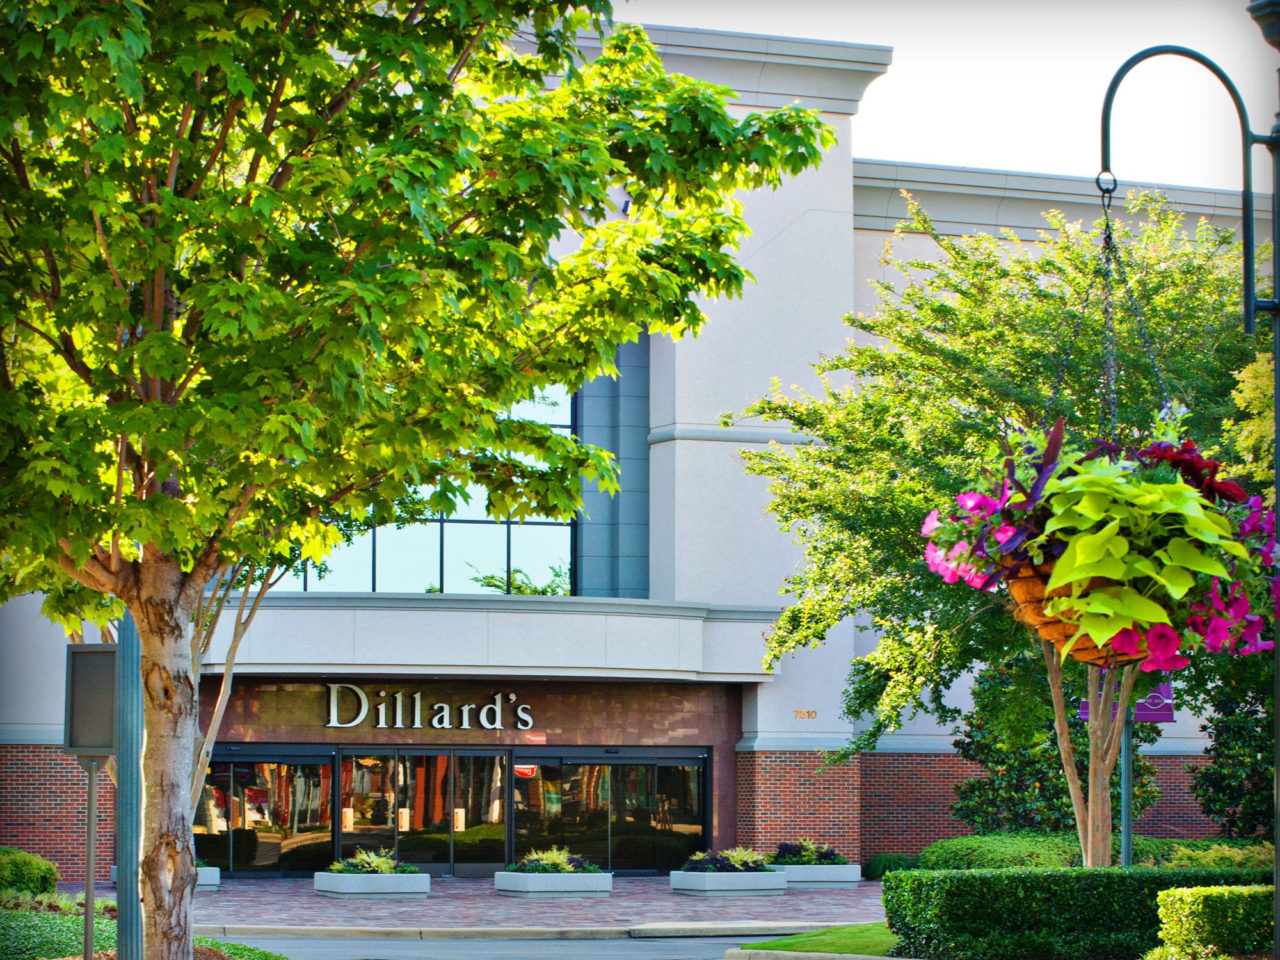 NEW} arrivals in the Dillard's - Shoppes at EastChase